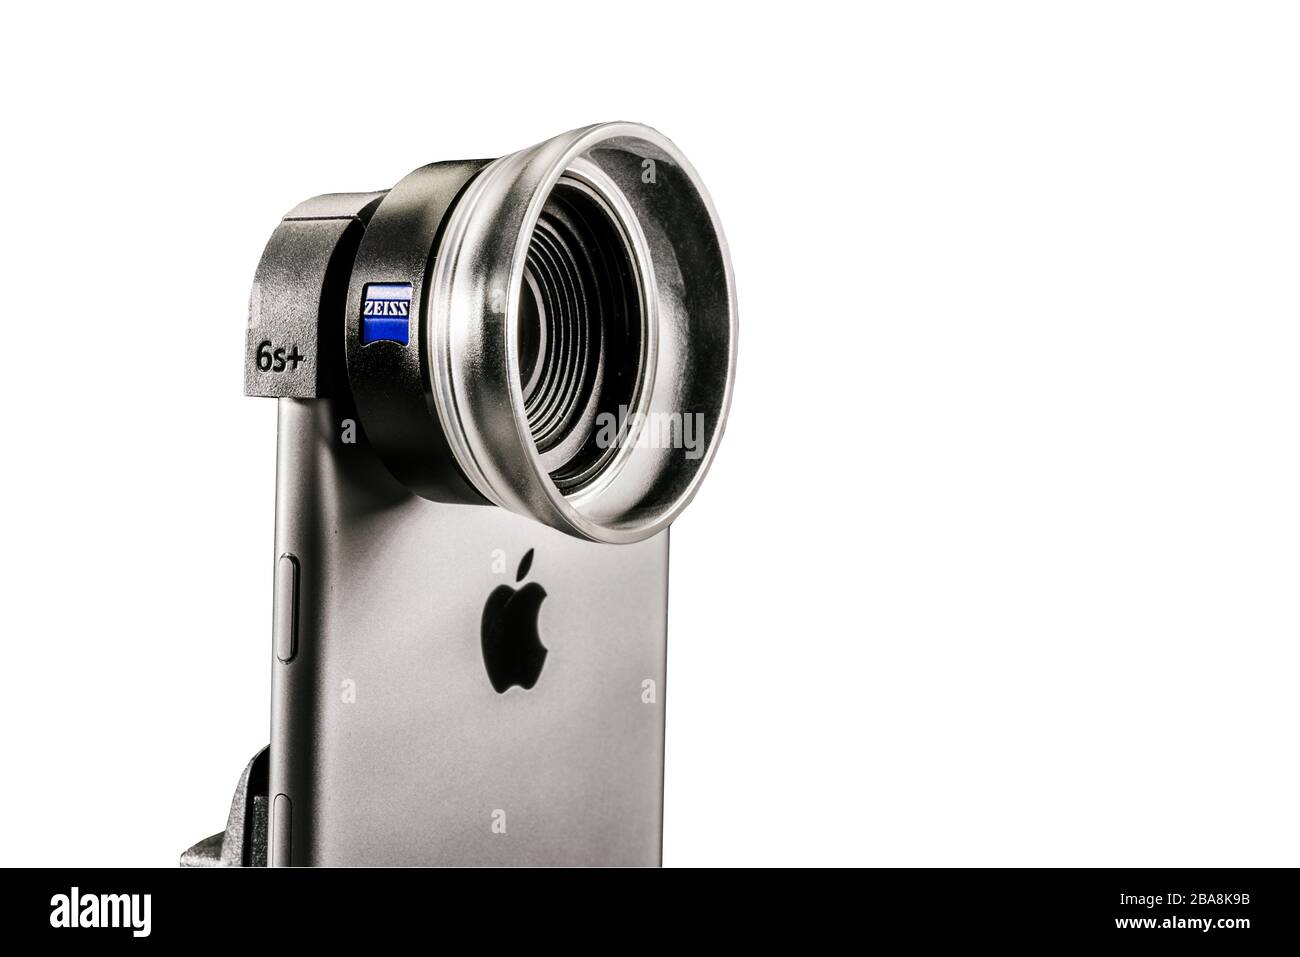 ExoLens, camera lens attachment for iPhone Stock Photo - Alamy